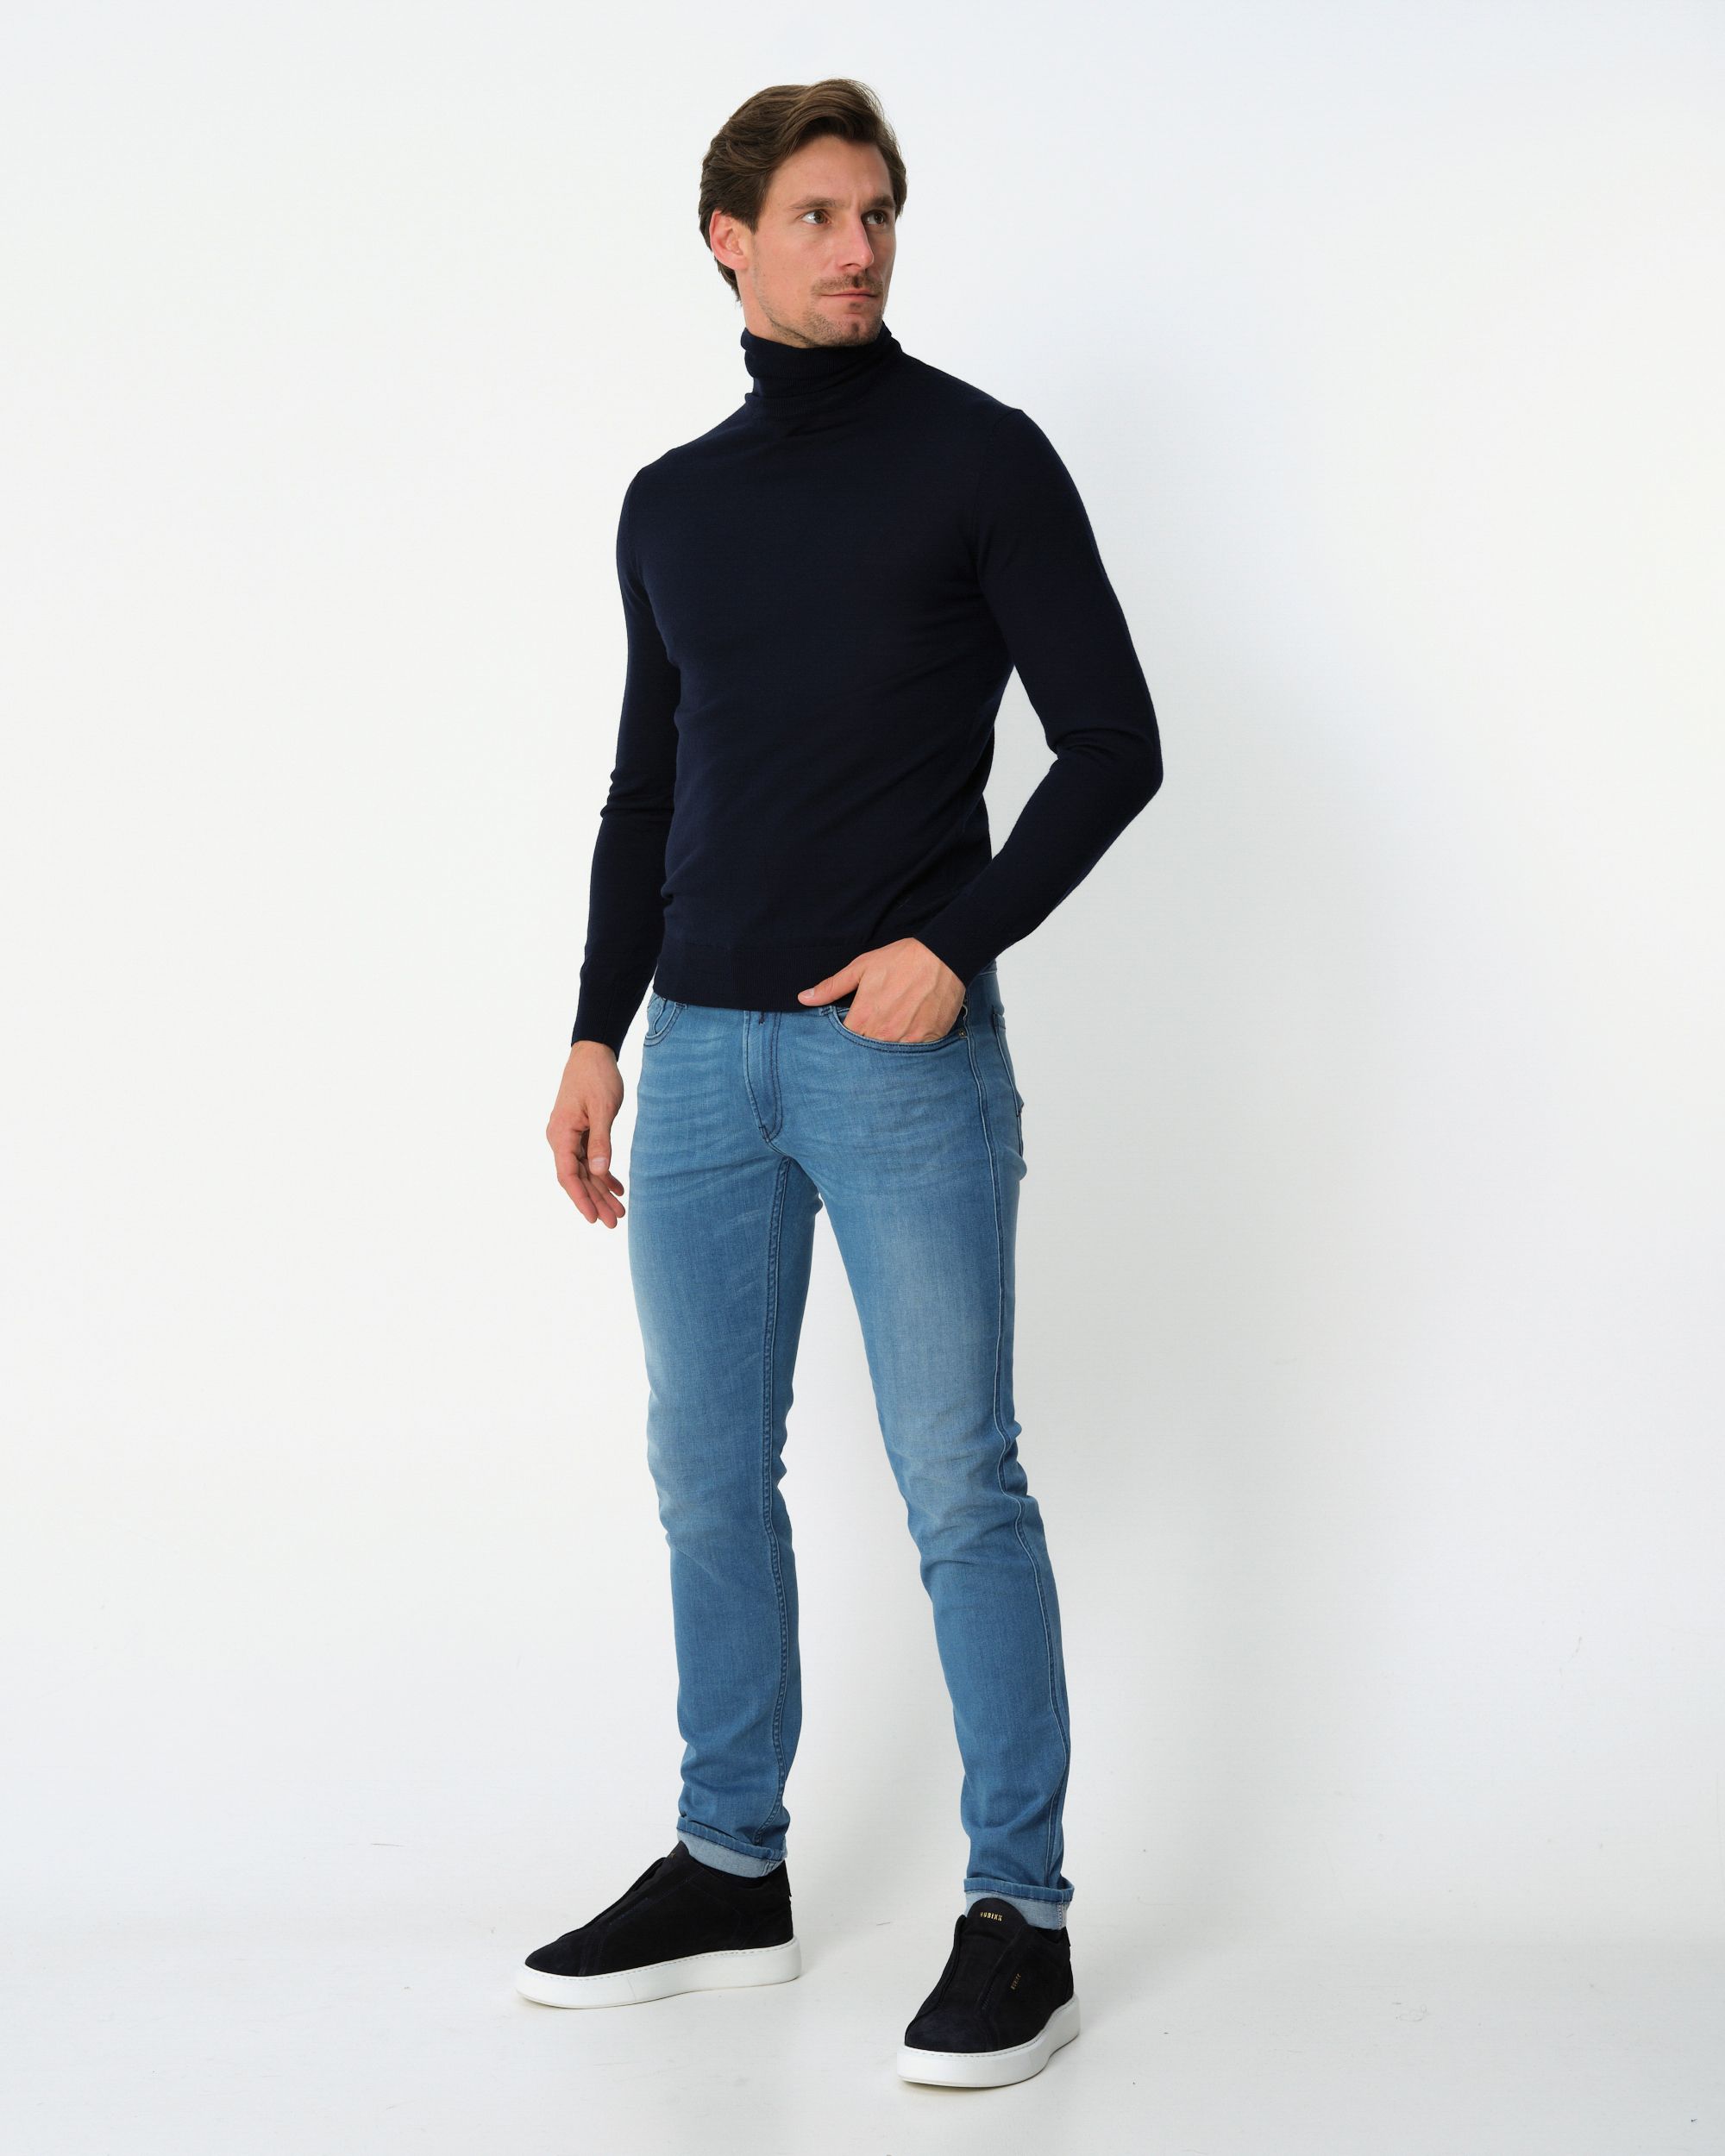 Replay Powerstretch Anbass Jeans Blauw 091342-001-29/32